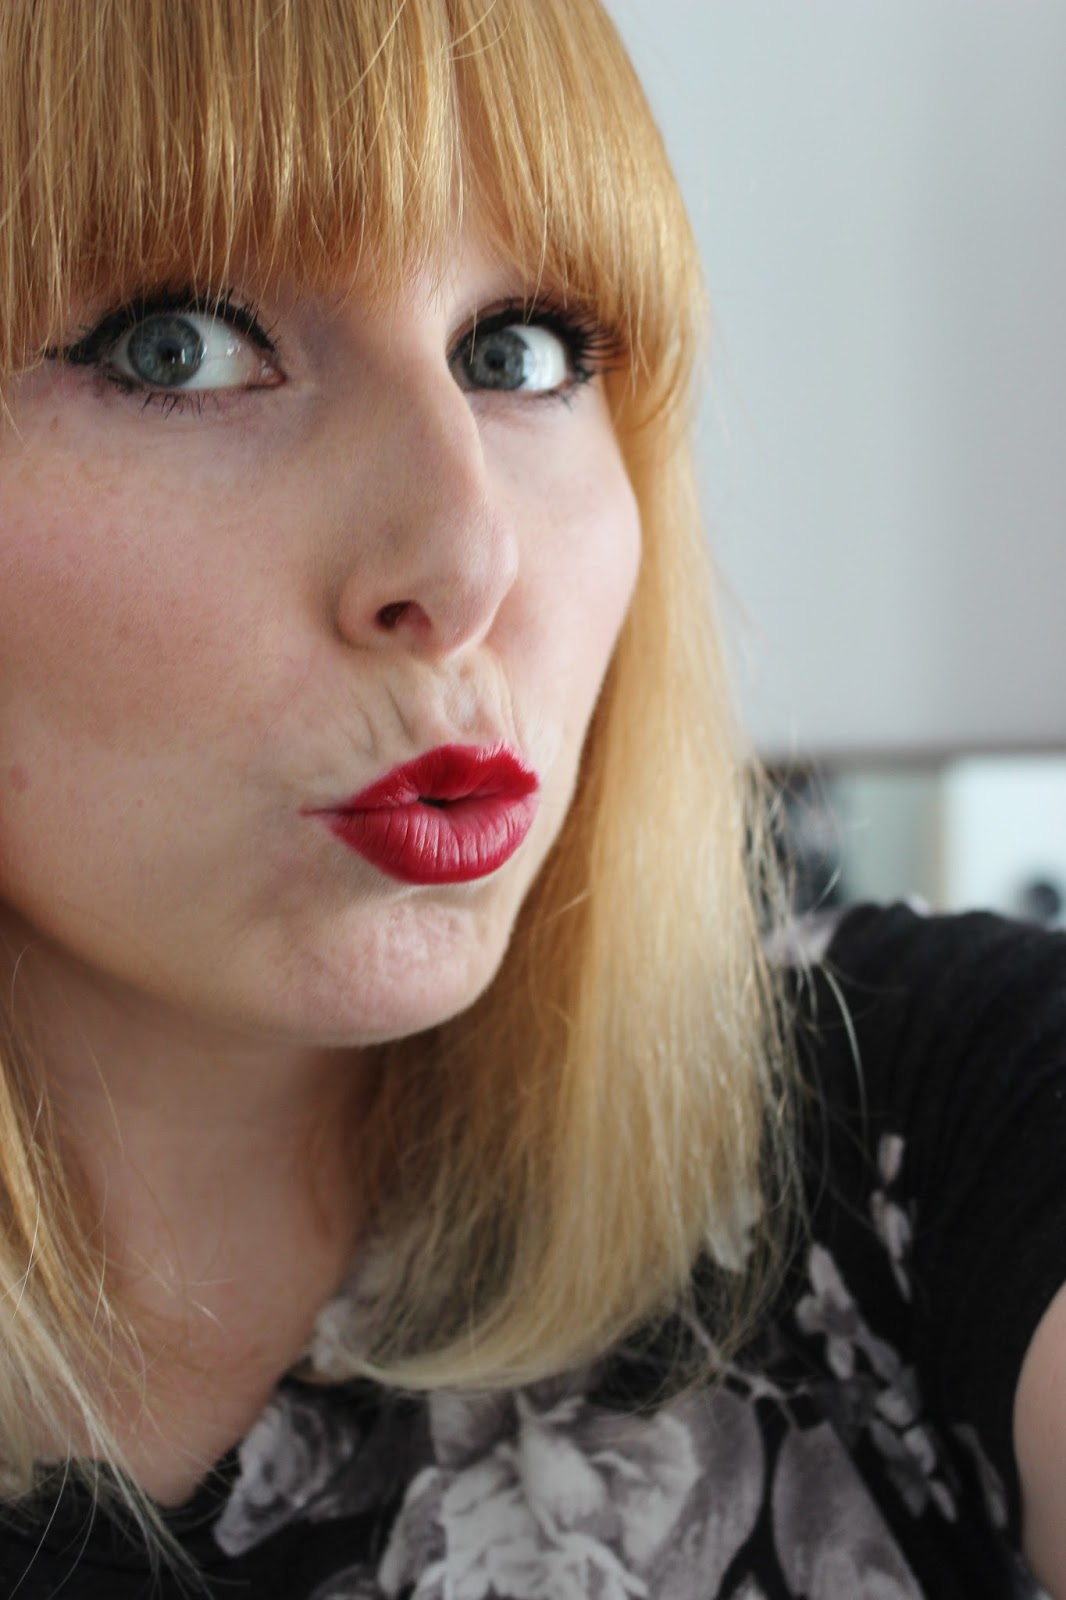 Urban Decay Pulp Fiction mrs mia wallace lipstick and liner swatches on lips